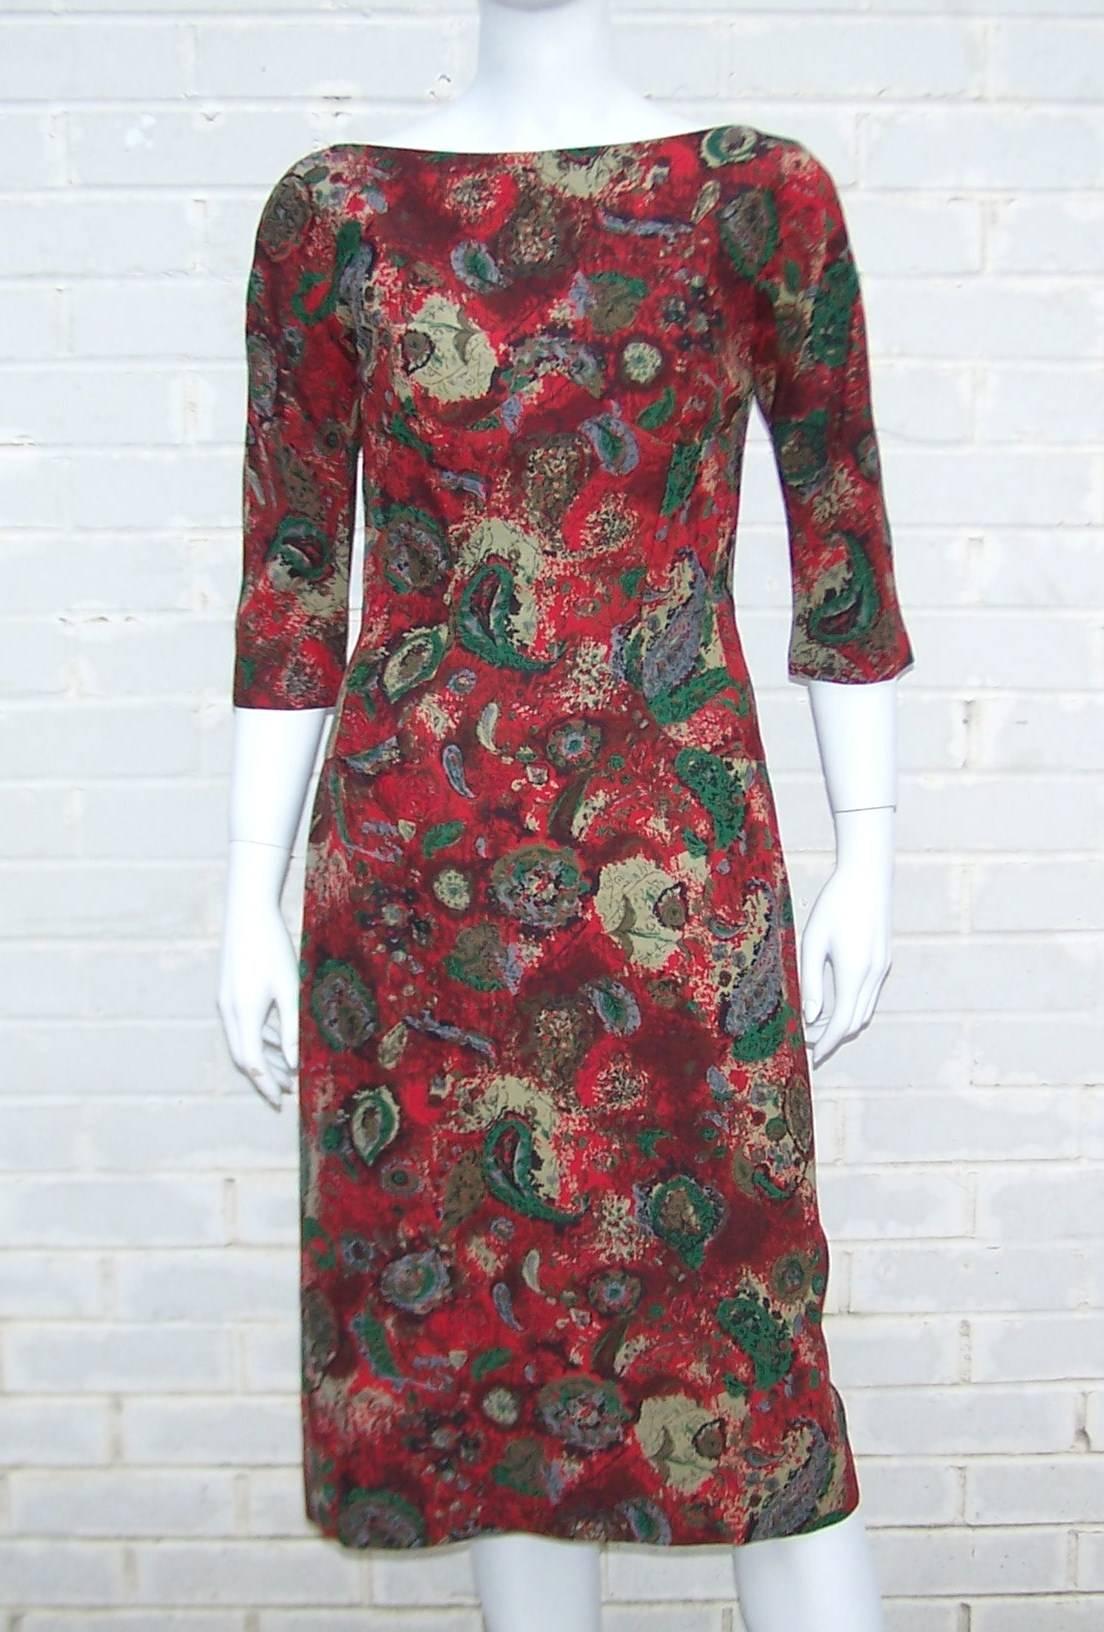 Brown 1950's Suzy Perette Abstract Paisley Print Dress With Bustle Kick Pleat & Hat